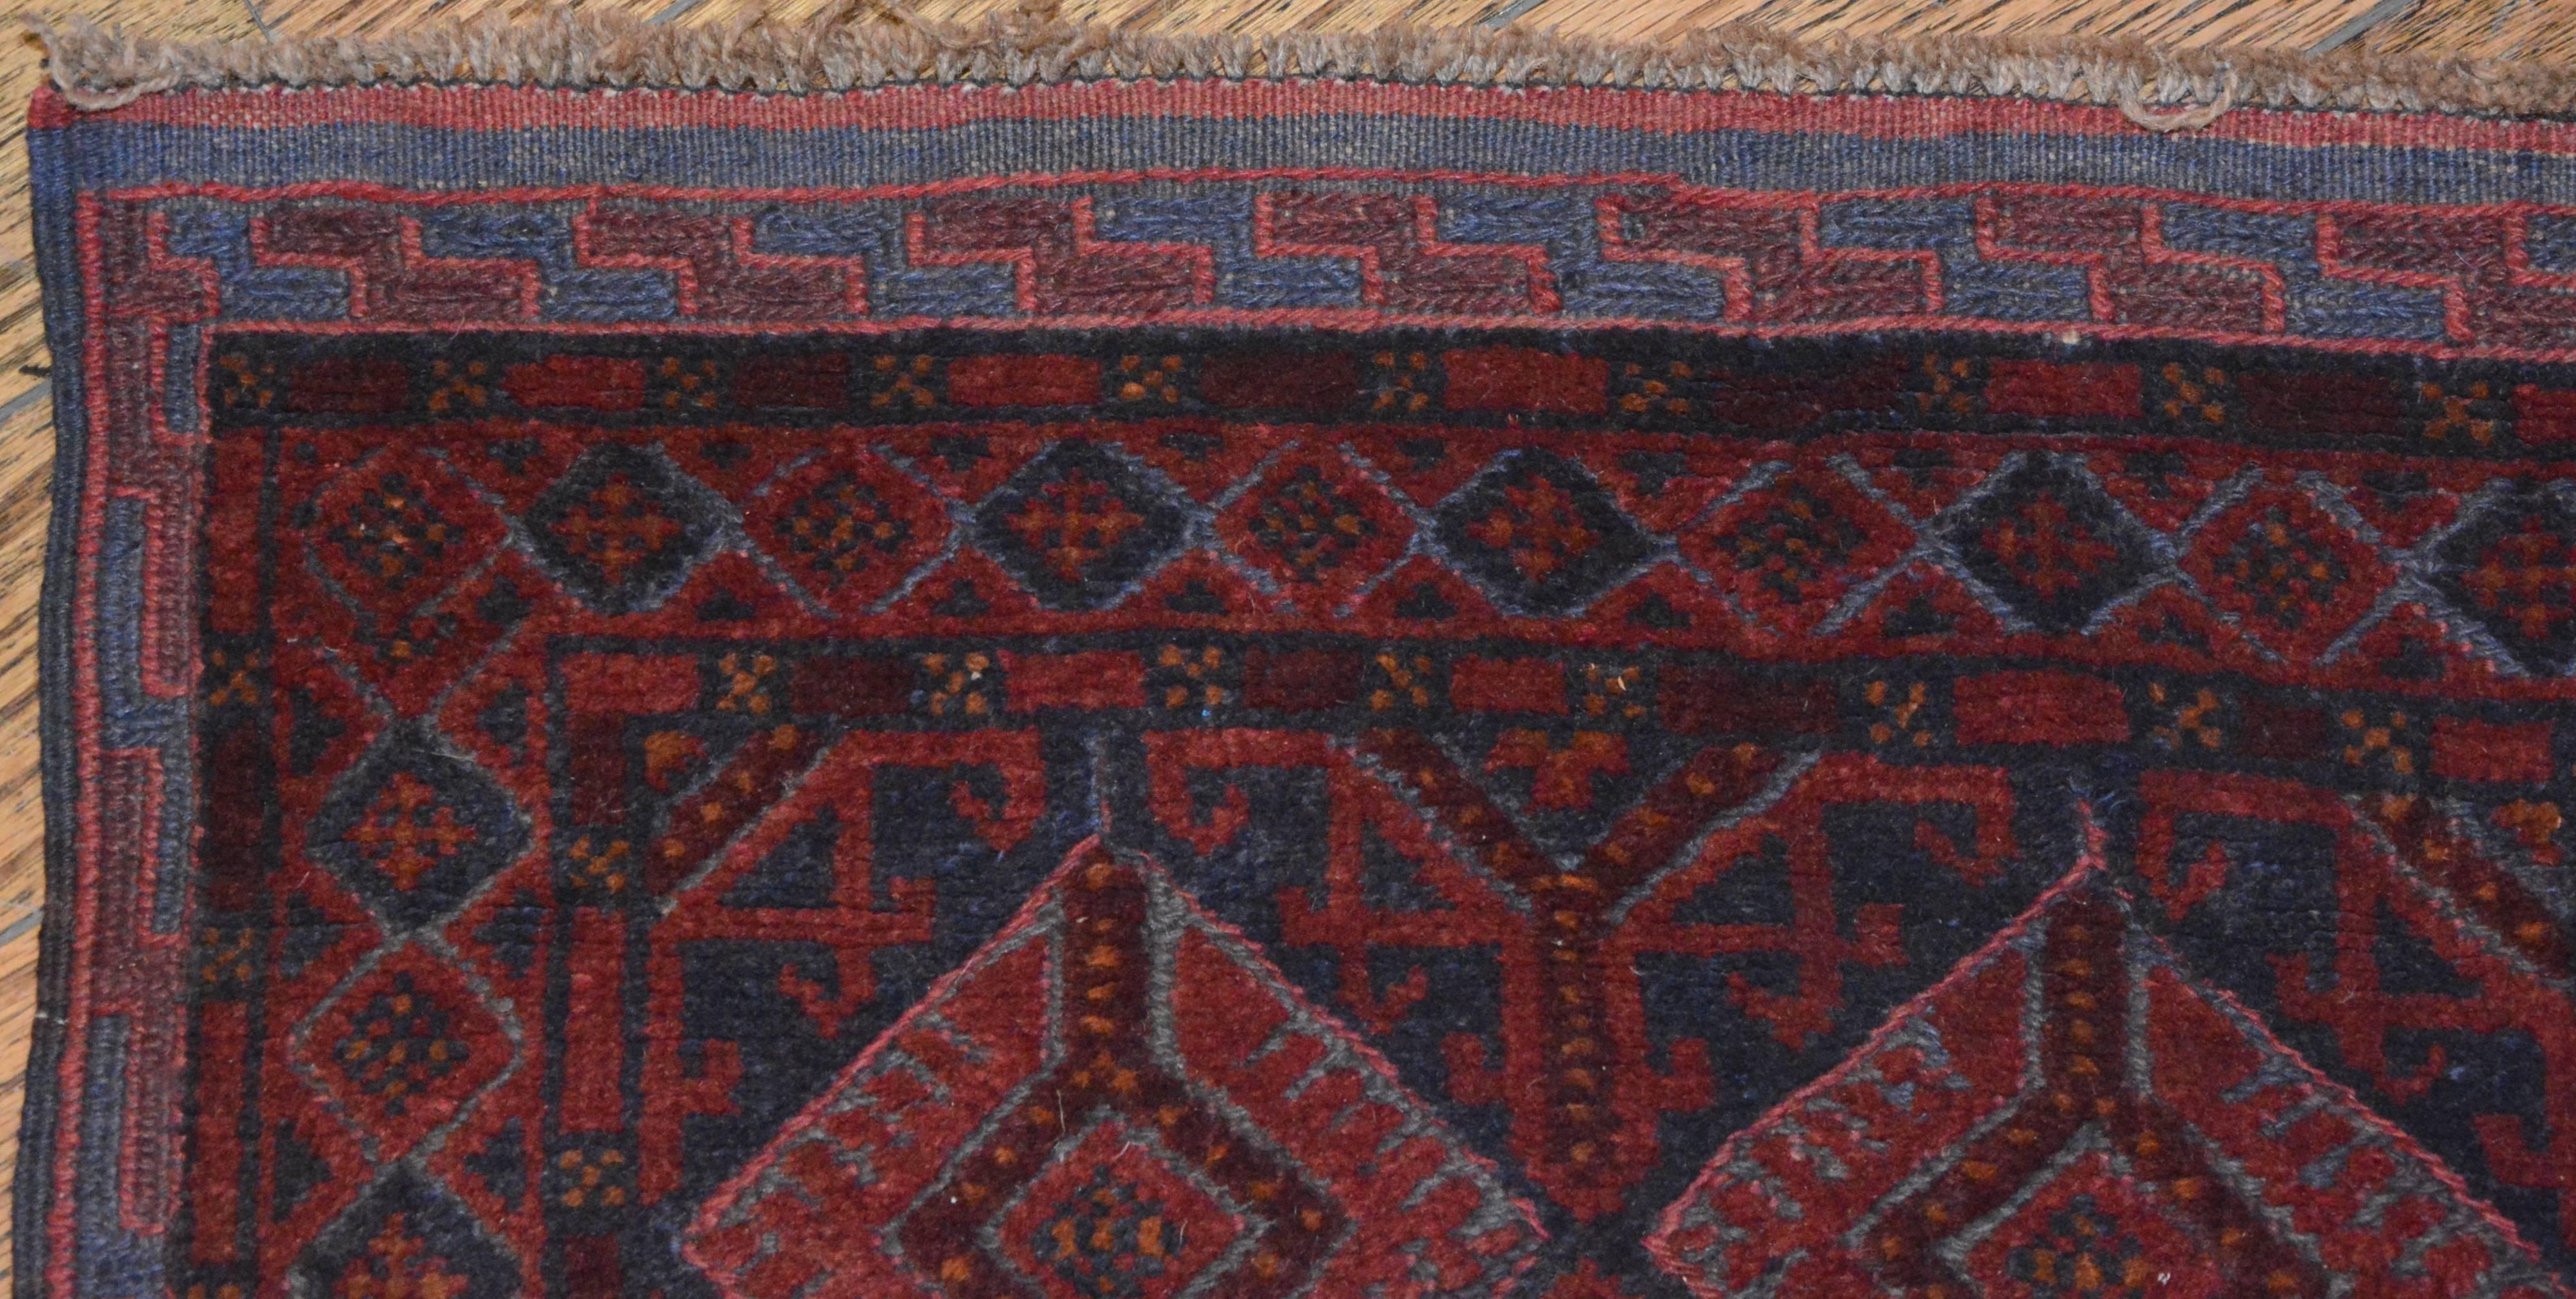 A hand knotted and woven Baluch tribal runner. This geometric wool rug is rendered in a palette of red, burgundy and midnight blue. It features an all-over pattern of latticed Tekke-style diamond medallions and Kurbage guls over a midnight blue